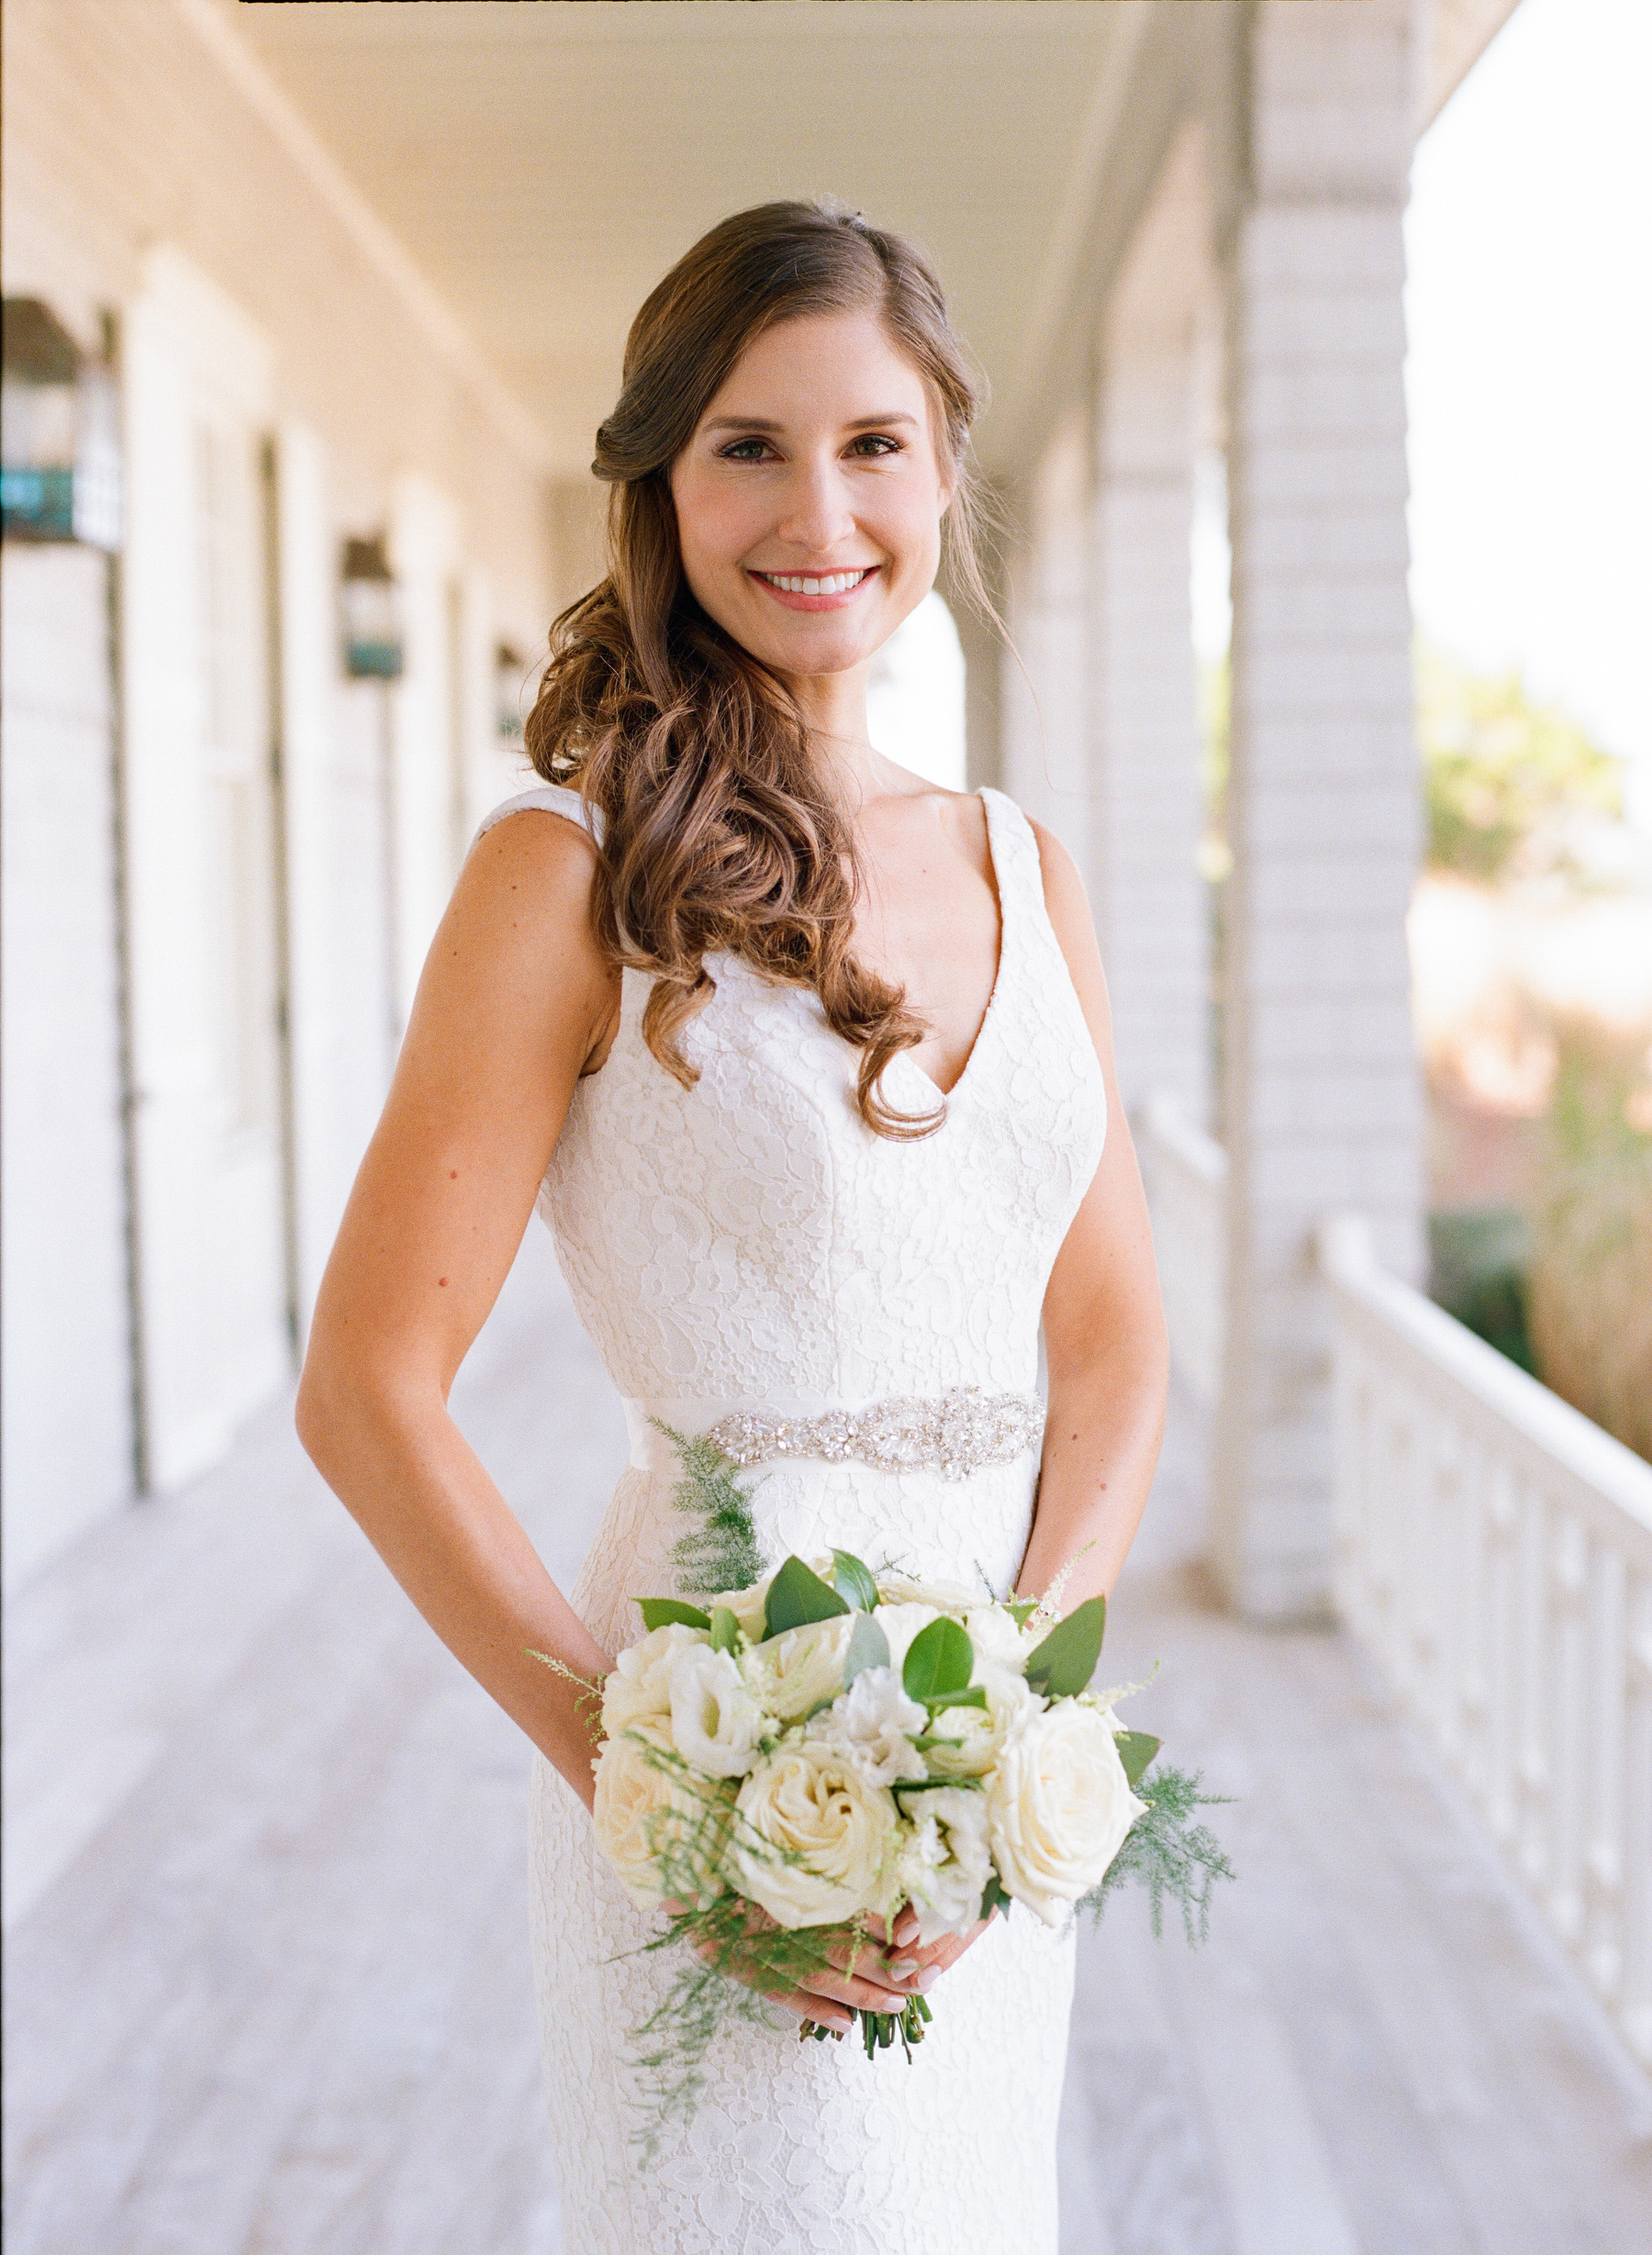 Bride with Chic Side Waves